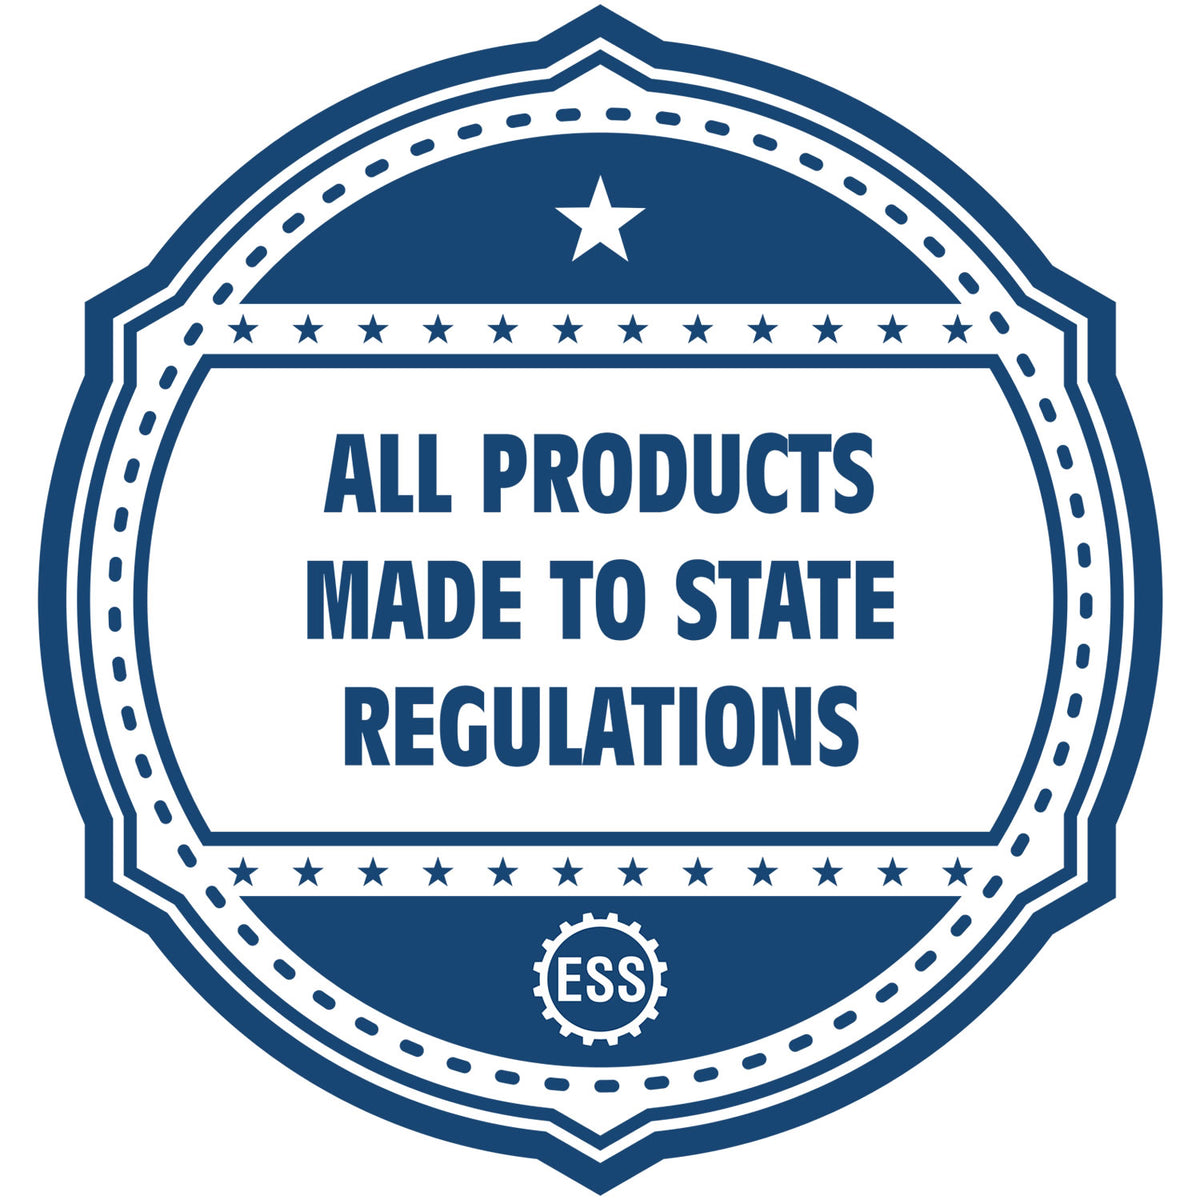 A blue icon or badge for the Gift South Dakota Engineer Seal showing that this product is made in compliance with state regulations.